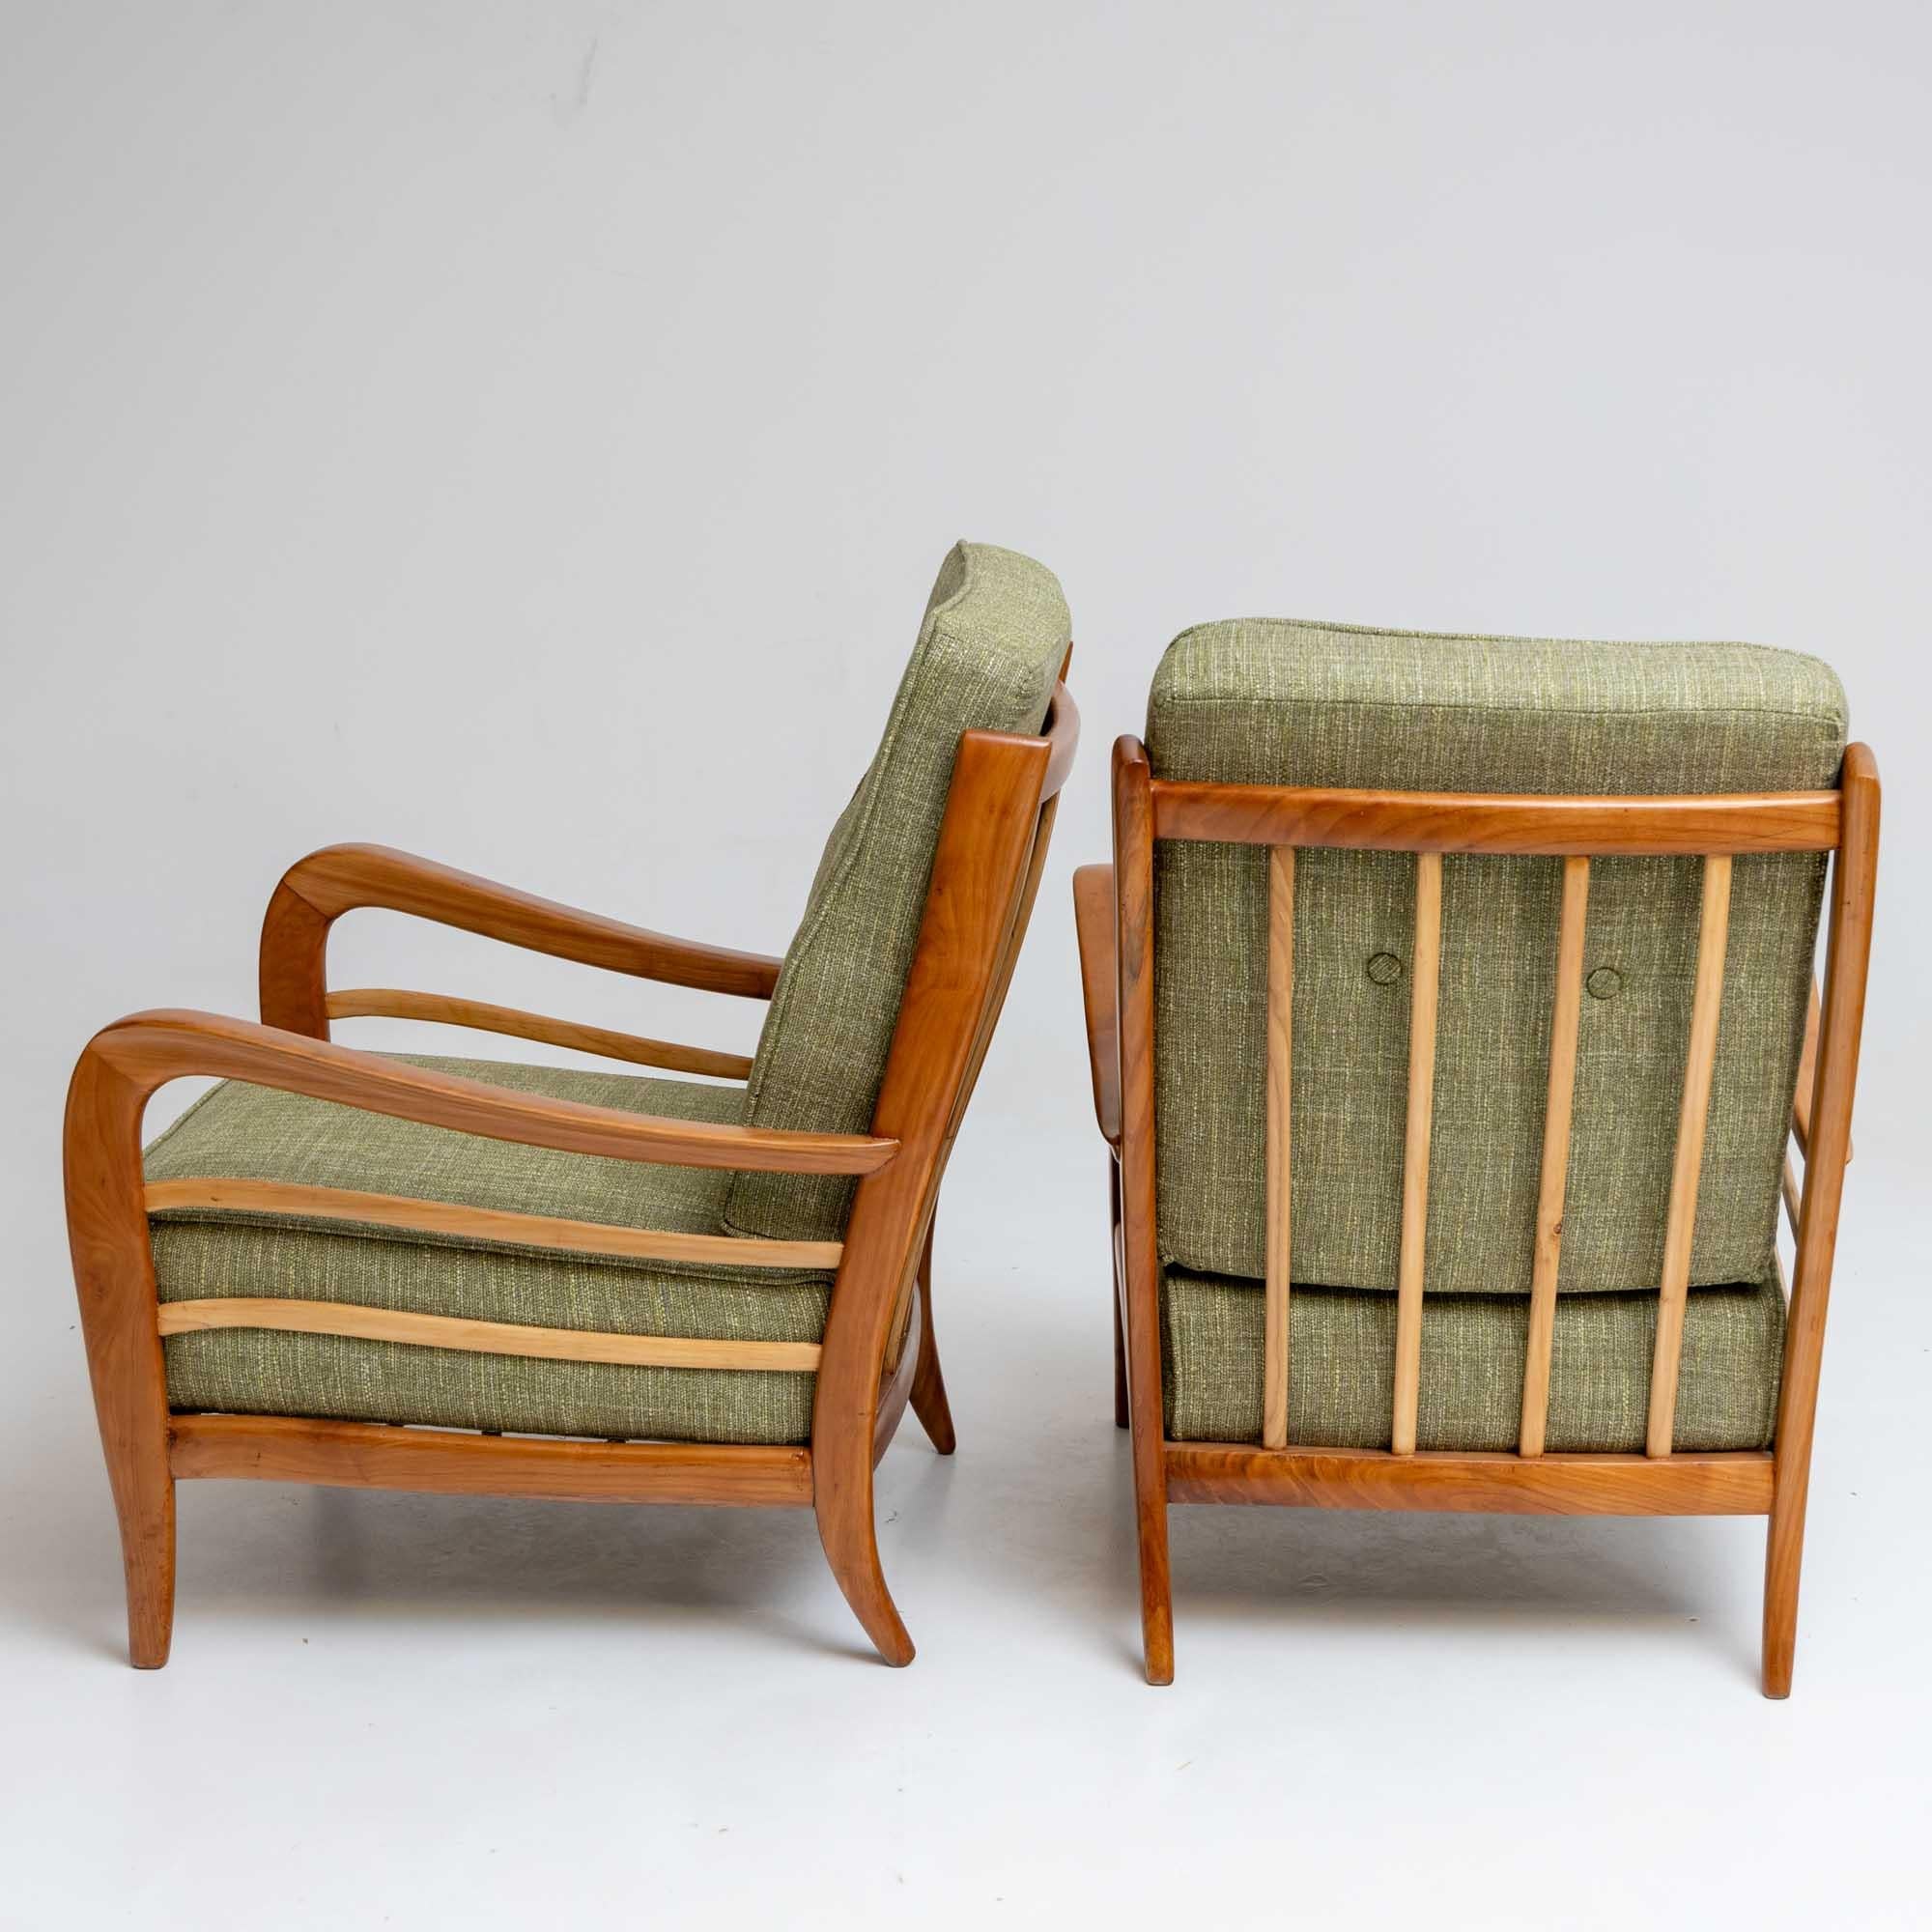 Pair of Lounge Chairs in Cherry, green Upholstery attr. Paolo Buffa, Italy 1950s For Sale 2